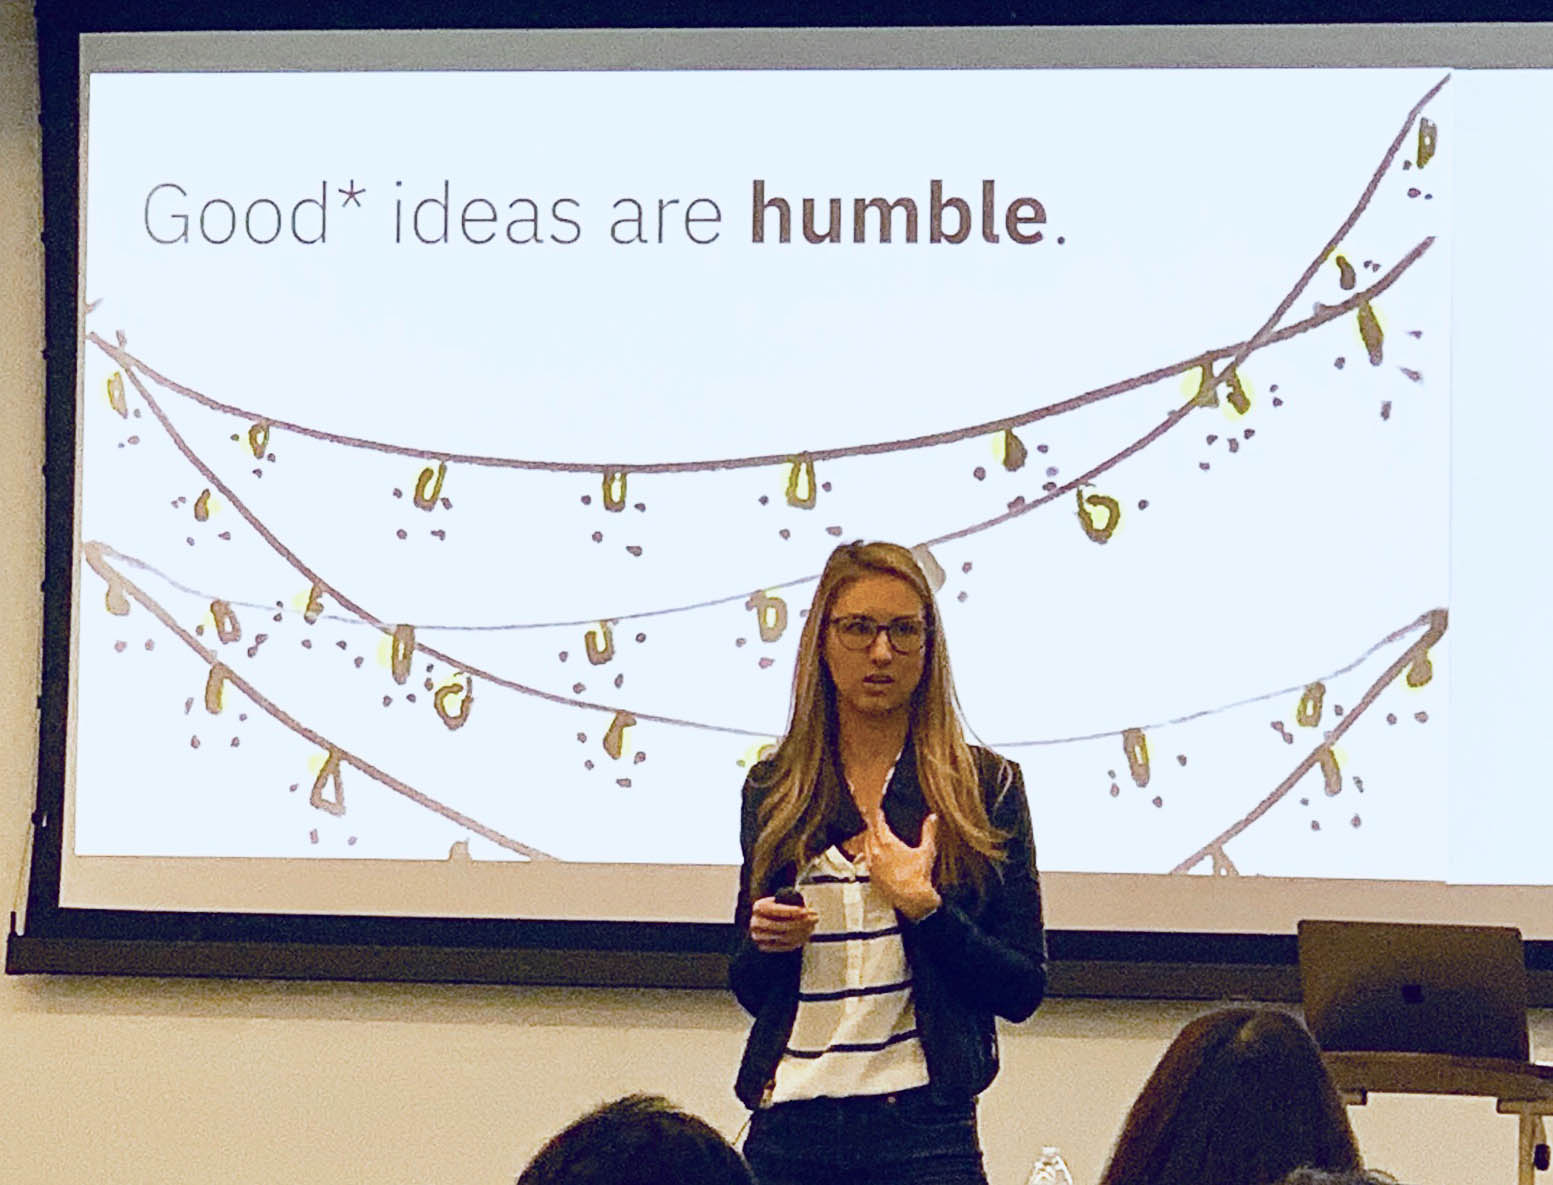 A photo in which I am standing in front of the room at World IA Day, presenting my slide around the concept that “Good* ideas are humble”, which includes an illustrated string of tiny Christmas lights, acting as a metaphor for the humility of a truly good idea: just one amongst many others.